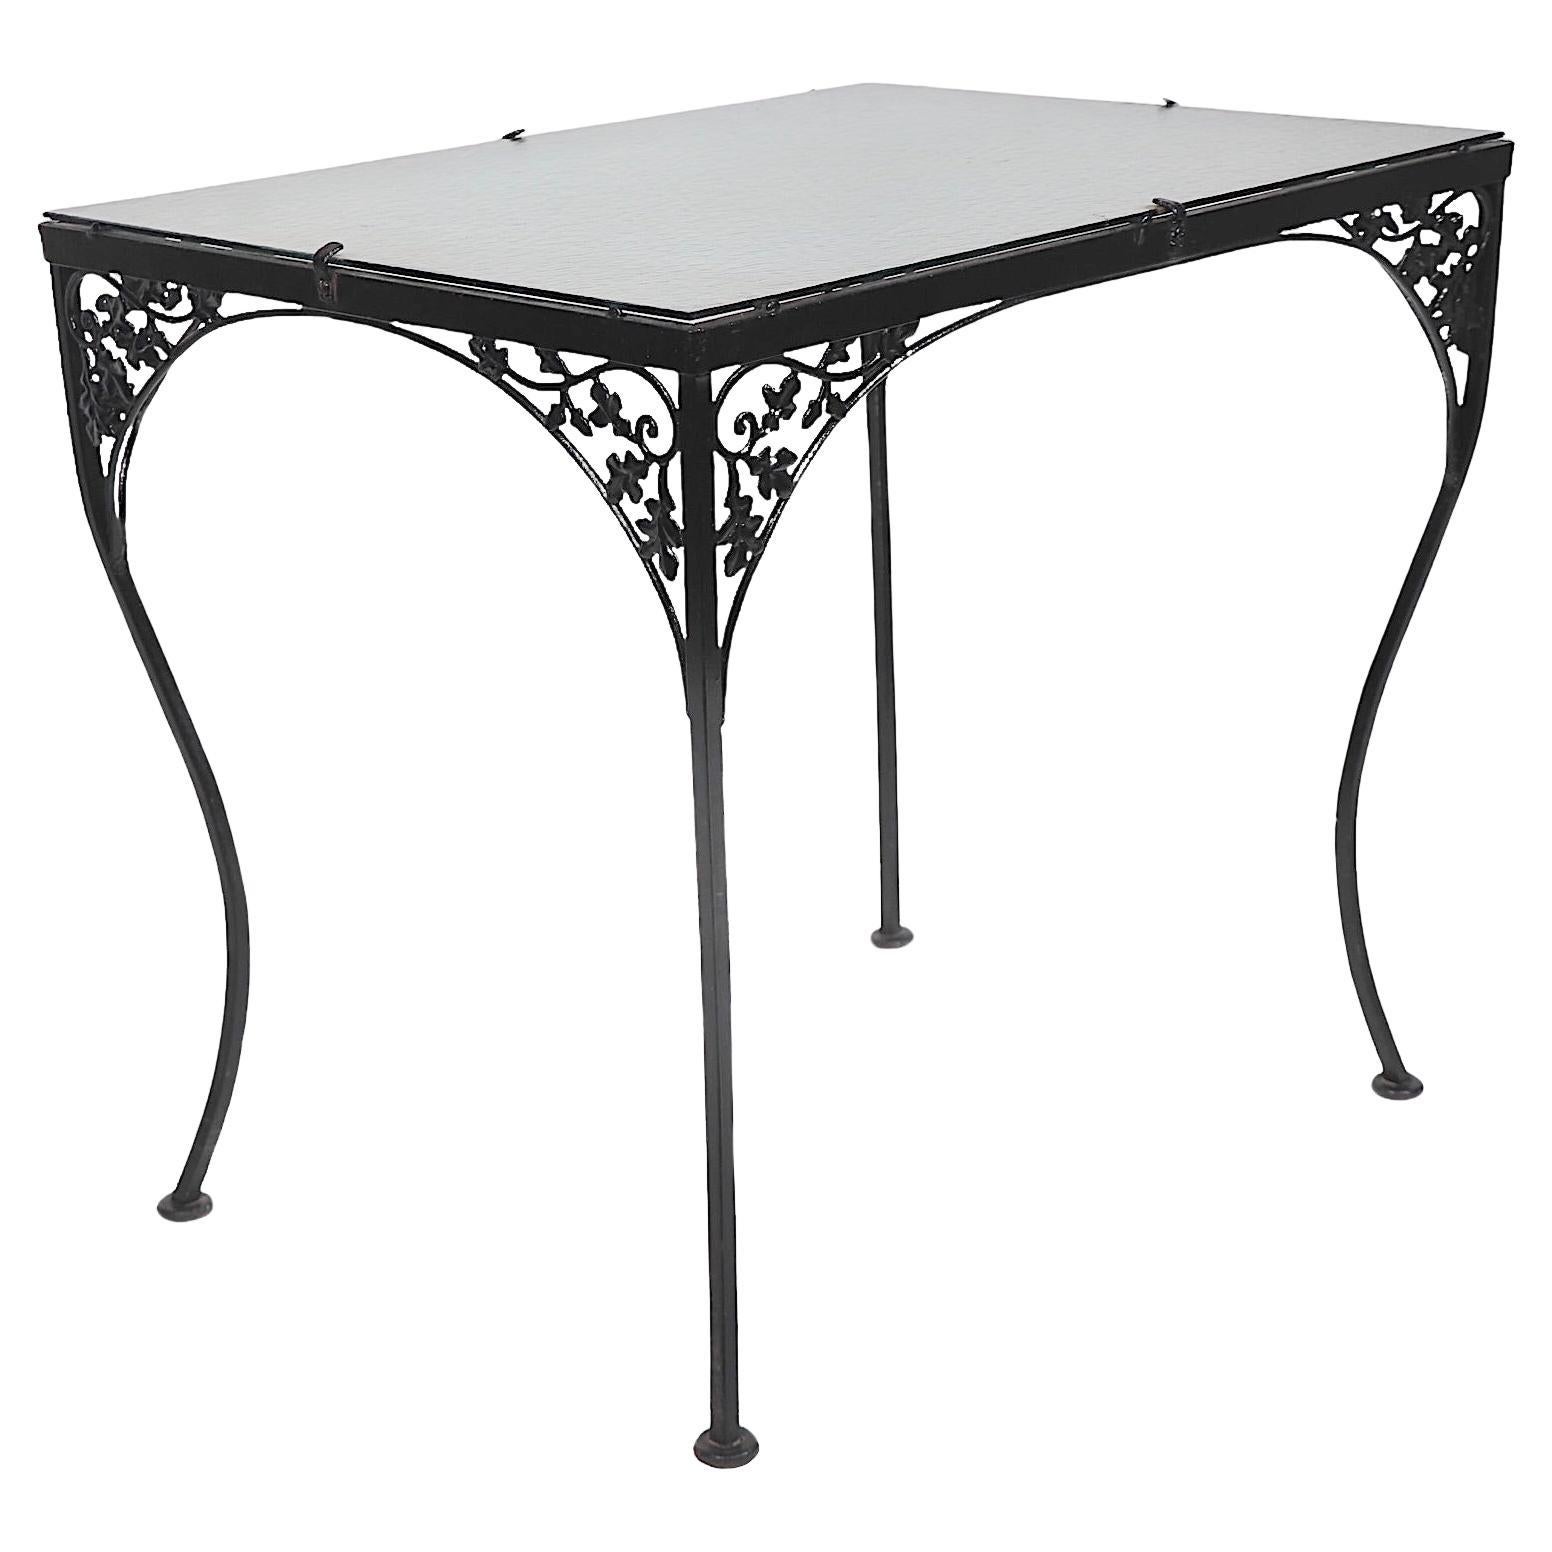 Ornate Wrought Iron and Glass Garden Patio Poolside Dining Table att. to Woodard For Sale